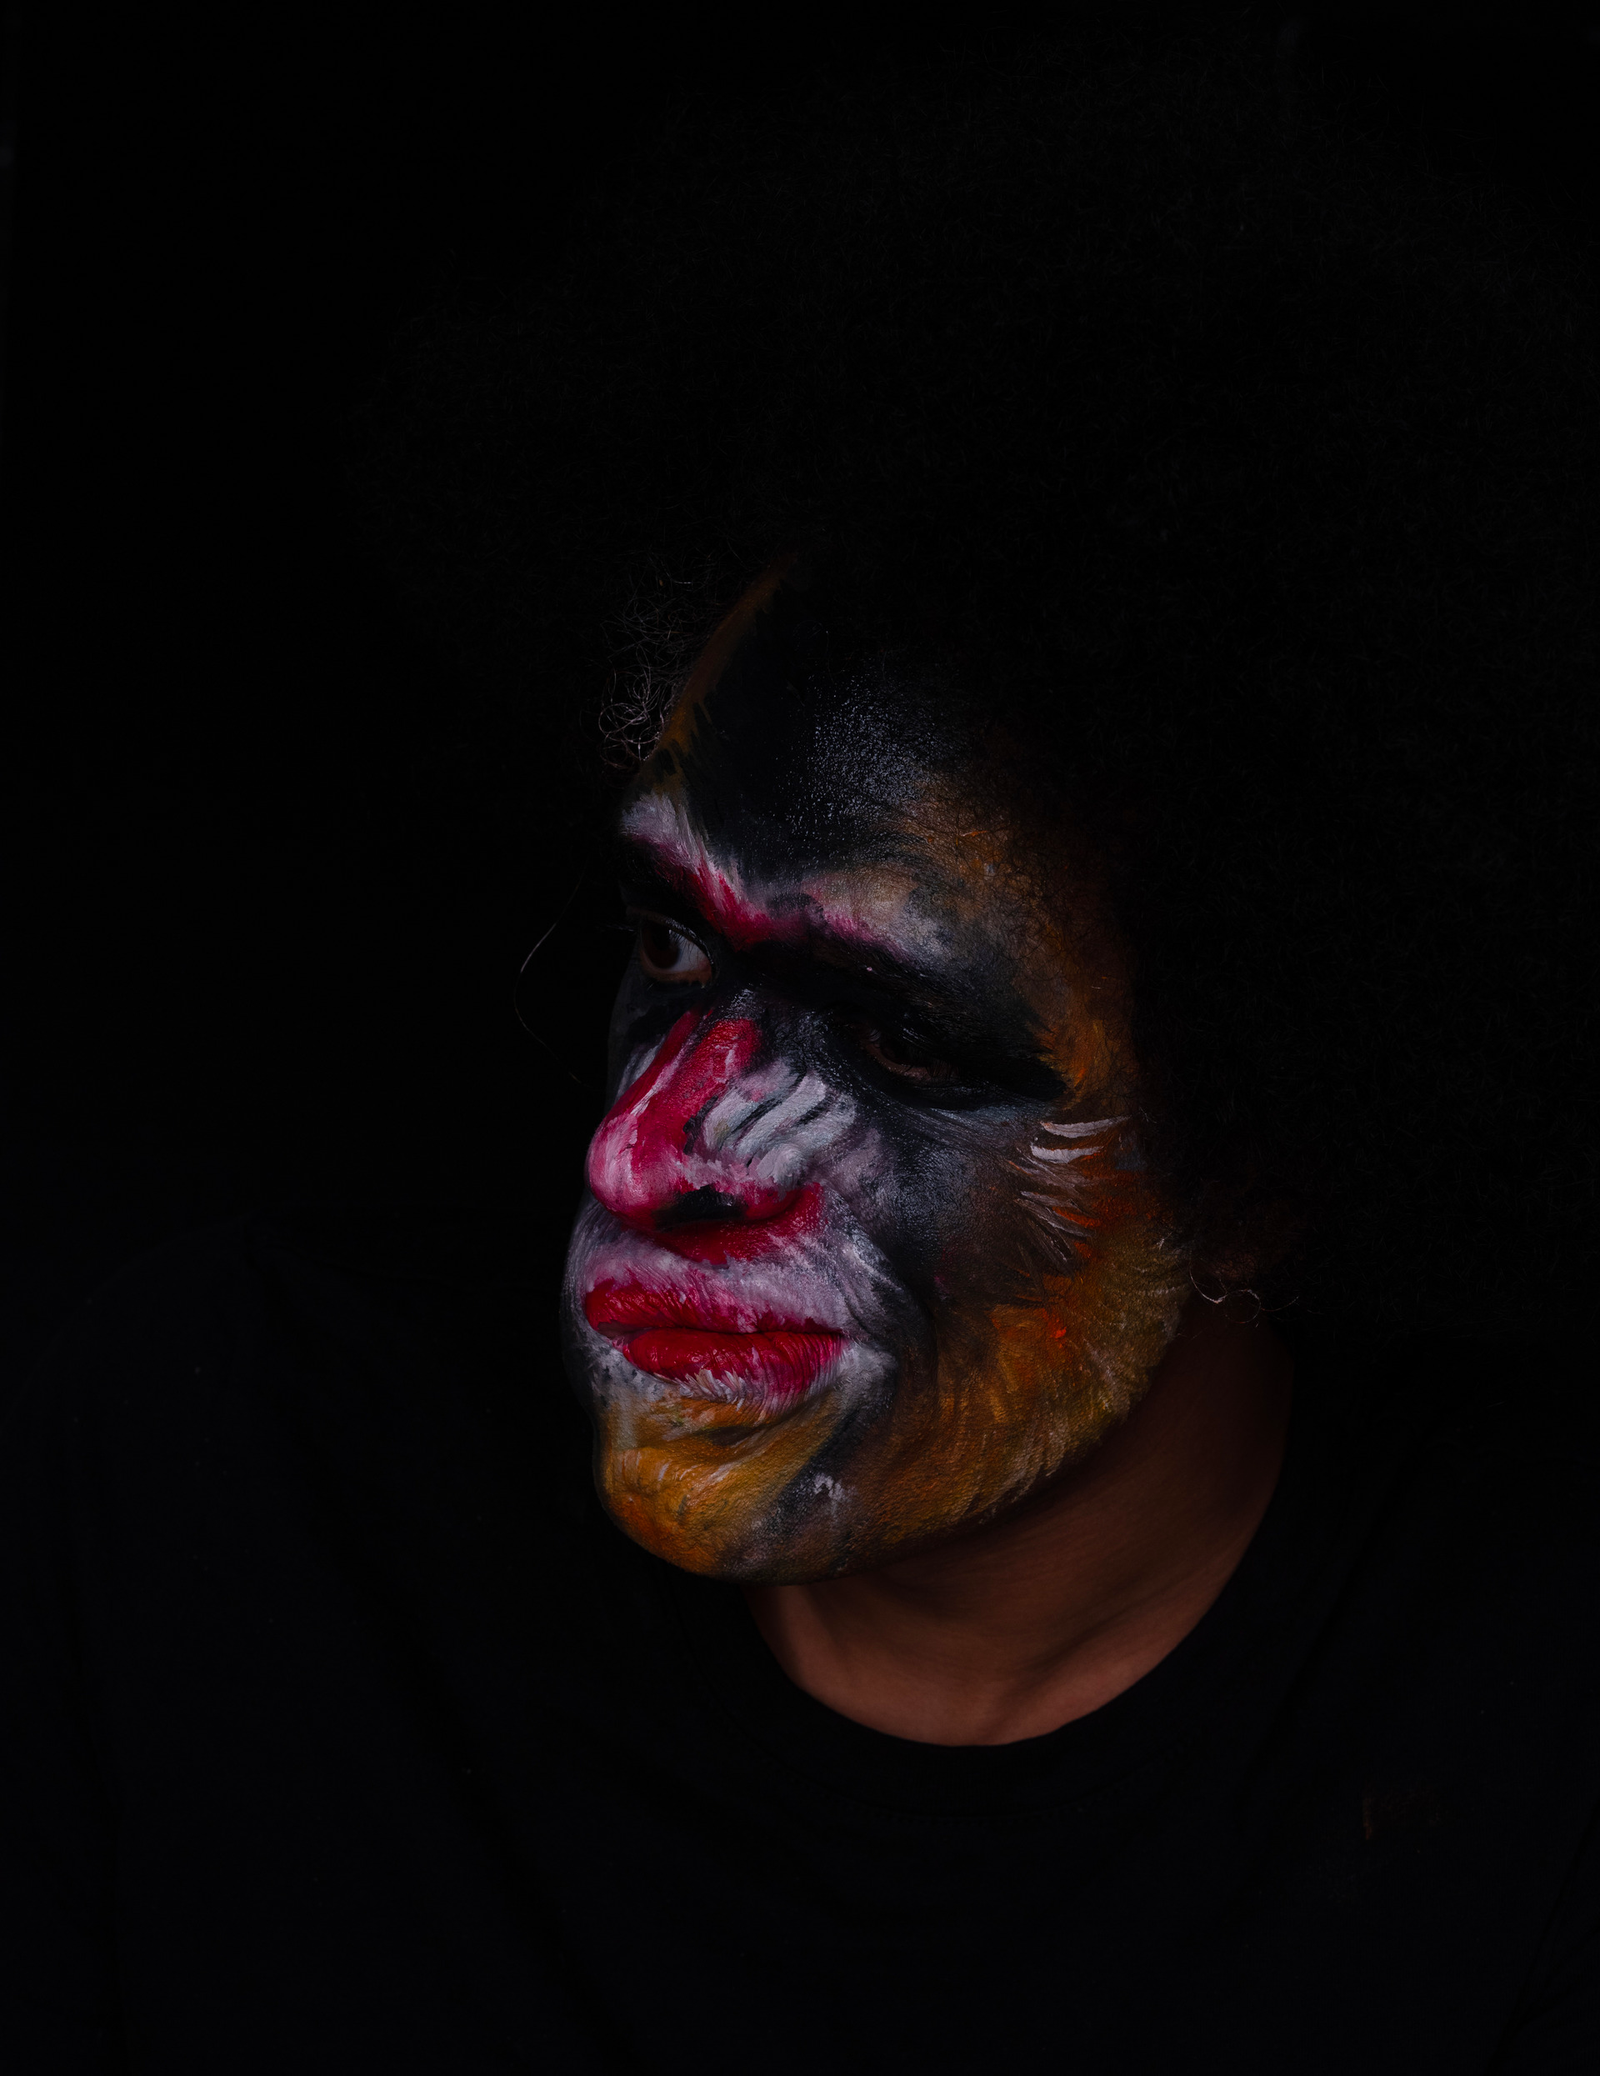 A photograph of myself, face paint as a Mandrill, in a black background